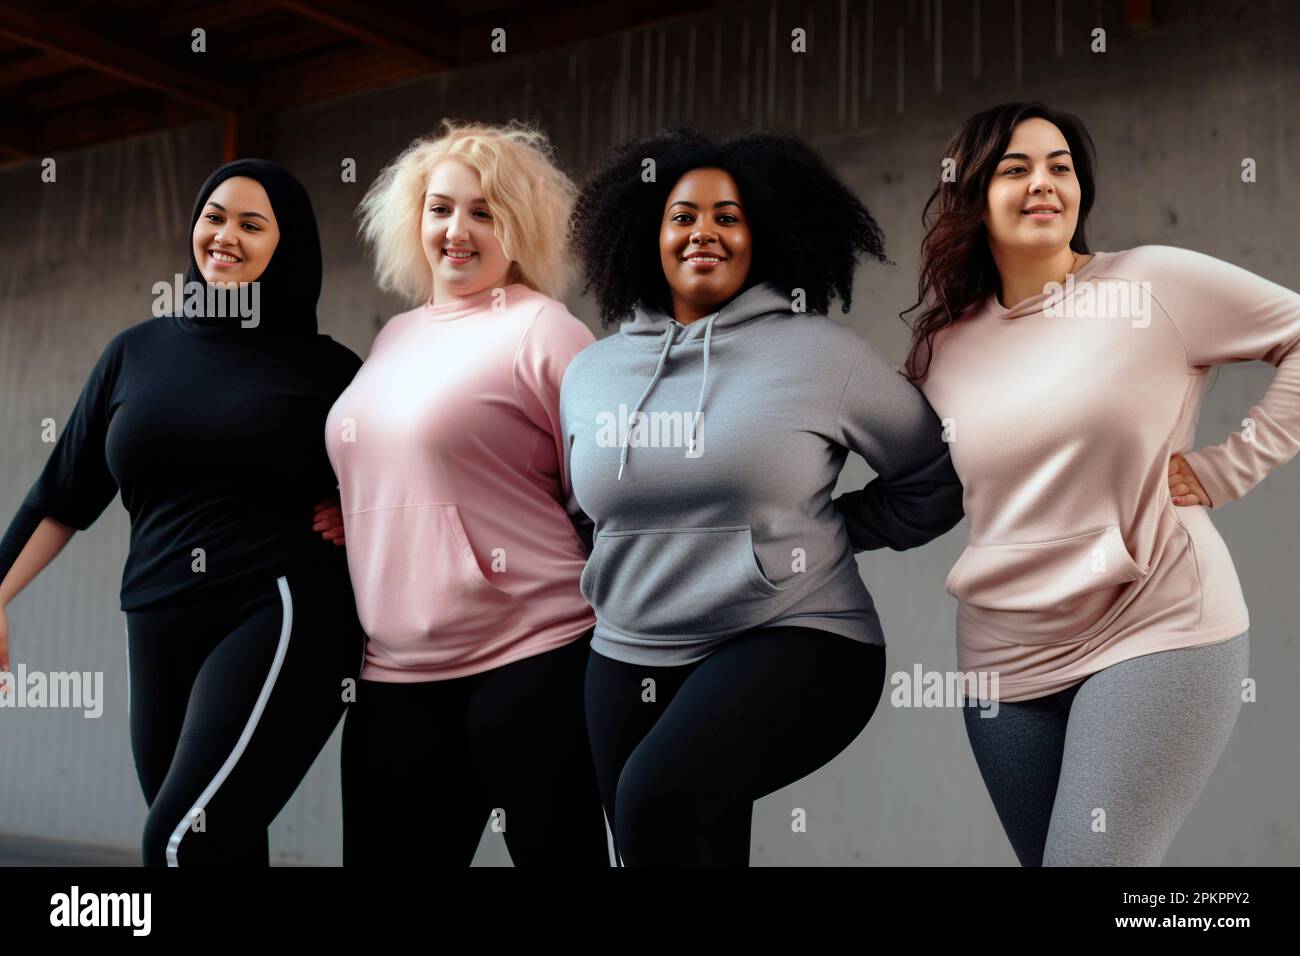 beautiful plus size women of different ethnicities posing Stock Photo